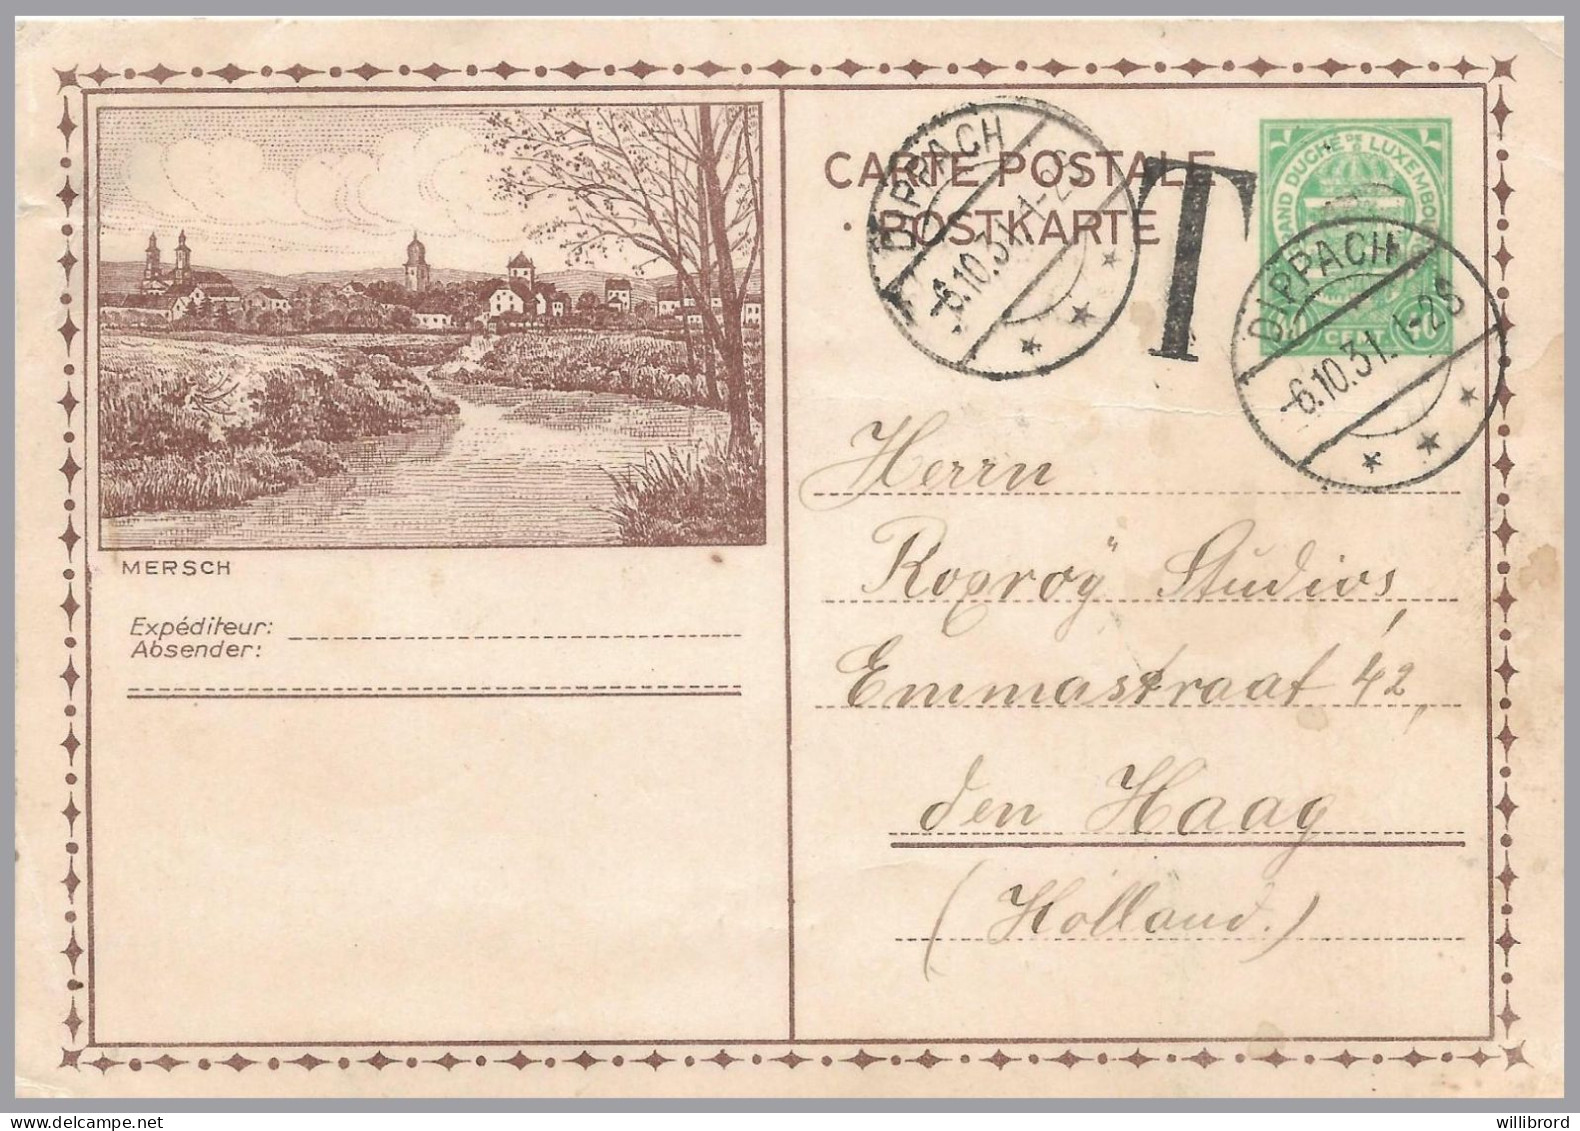 LUXEMBOURG - DIPPACH T-34 1931 - MERSCH View Arms Postal Stationery - Postage Due To Netherlands - Ganzsachen